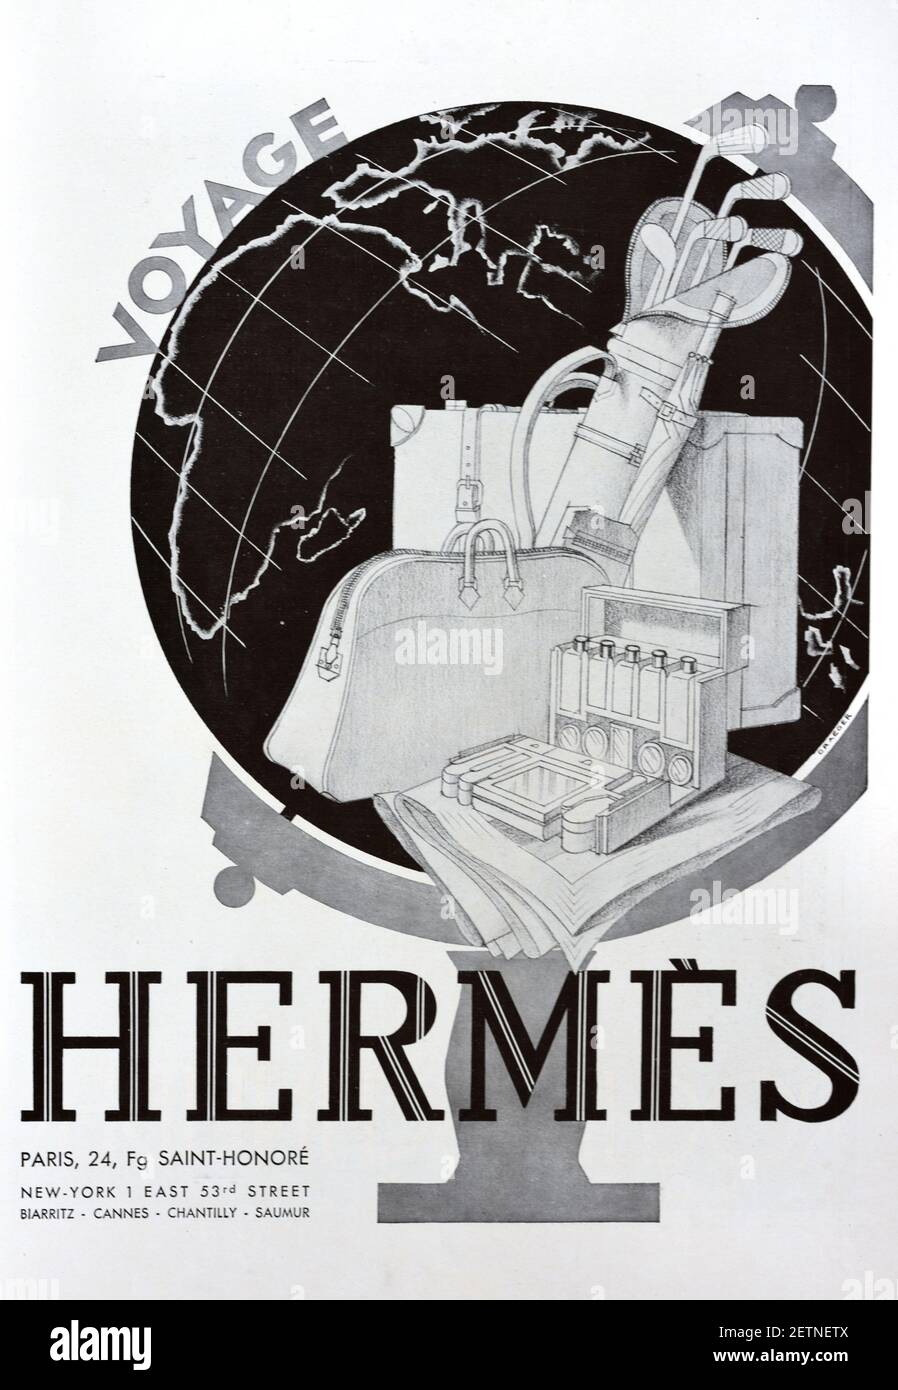 Vintage Advert, Advertisement or Publicity for Hermes with Globe & Travel  Goods including Suitcases, a Golf Bag and Golf Clubs 1931 Stock Photo -  Alamy